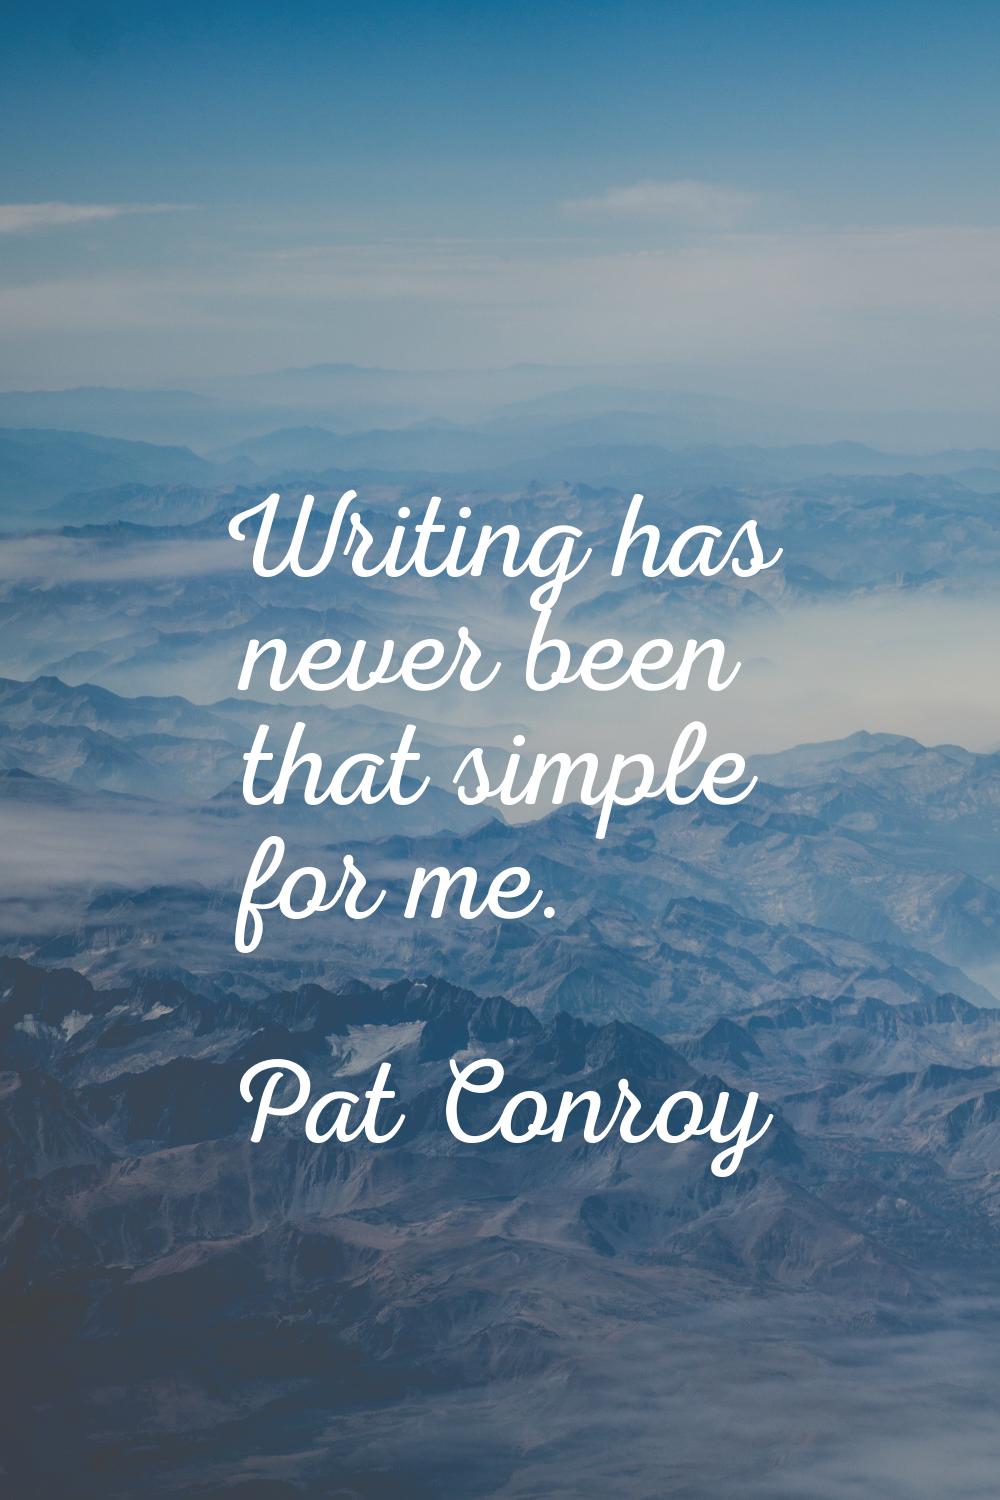 Writing has never been that simple for me.